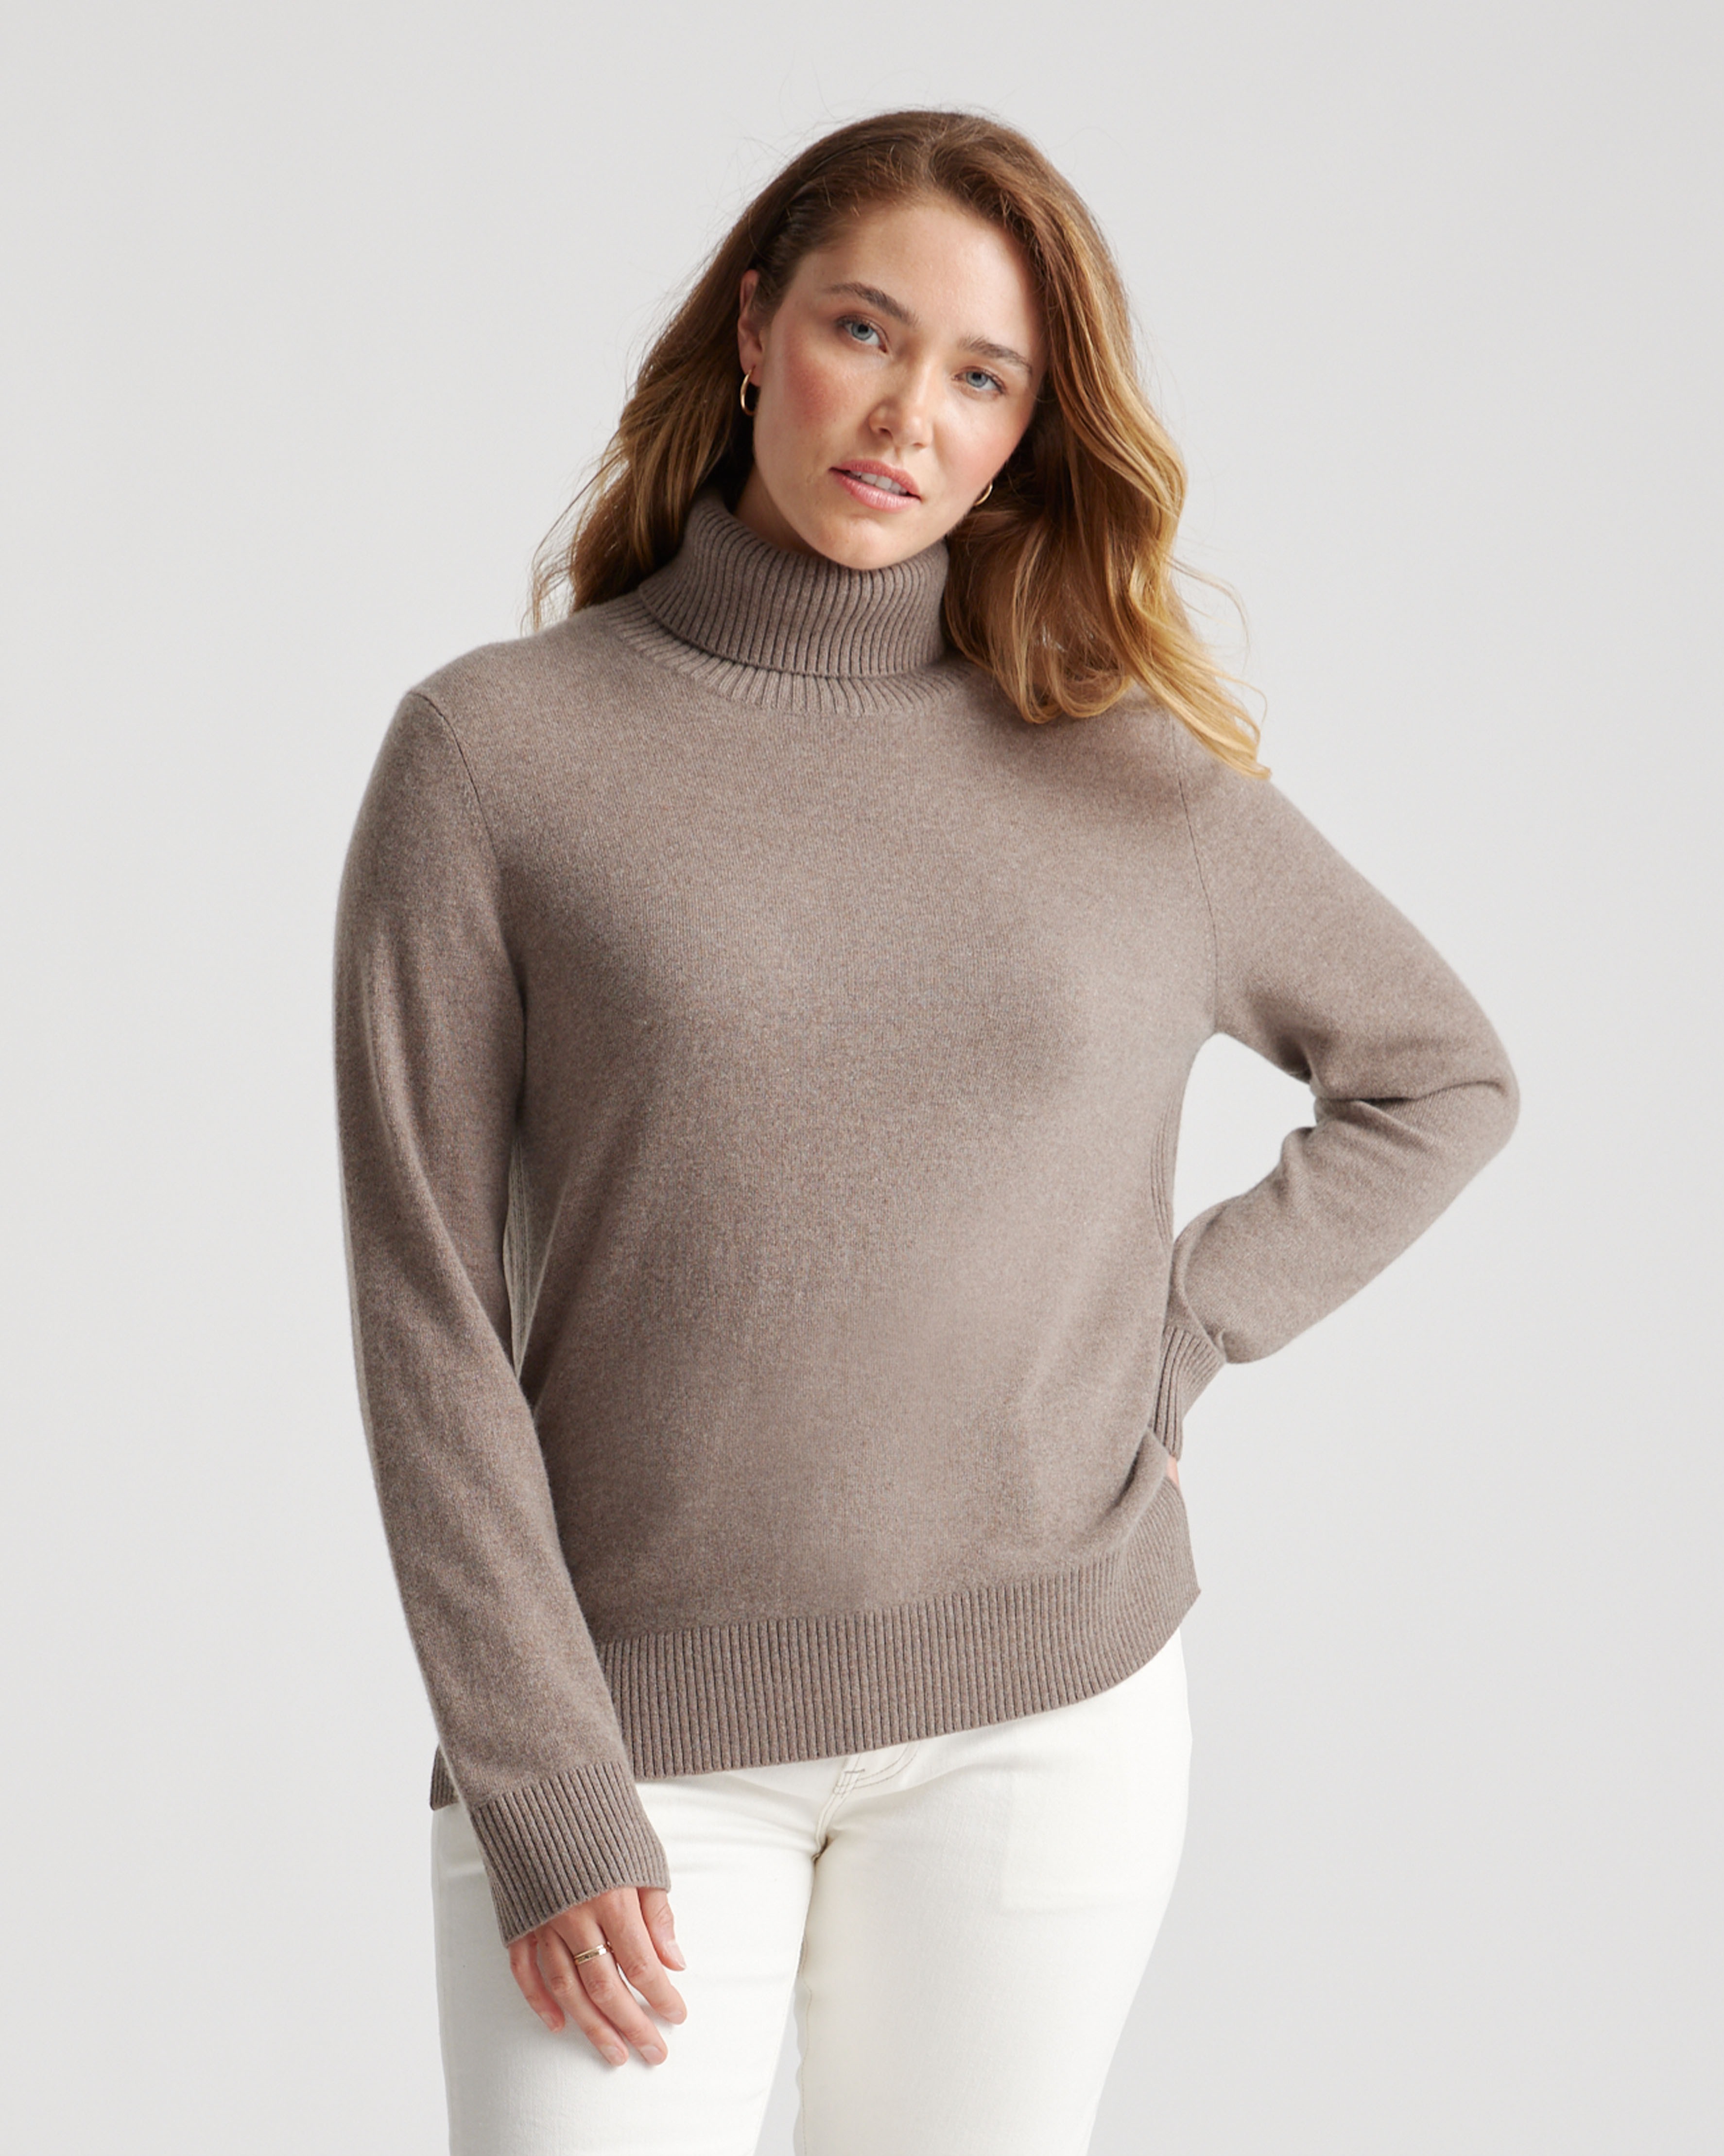 Super Luxe Baby Cashmere Crewneck Sweater